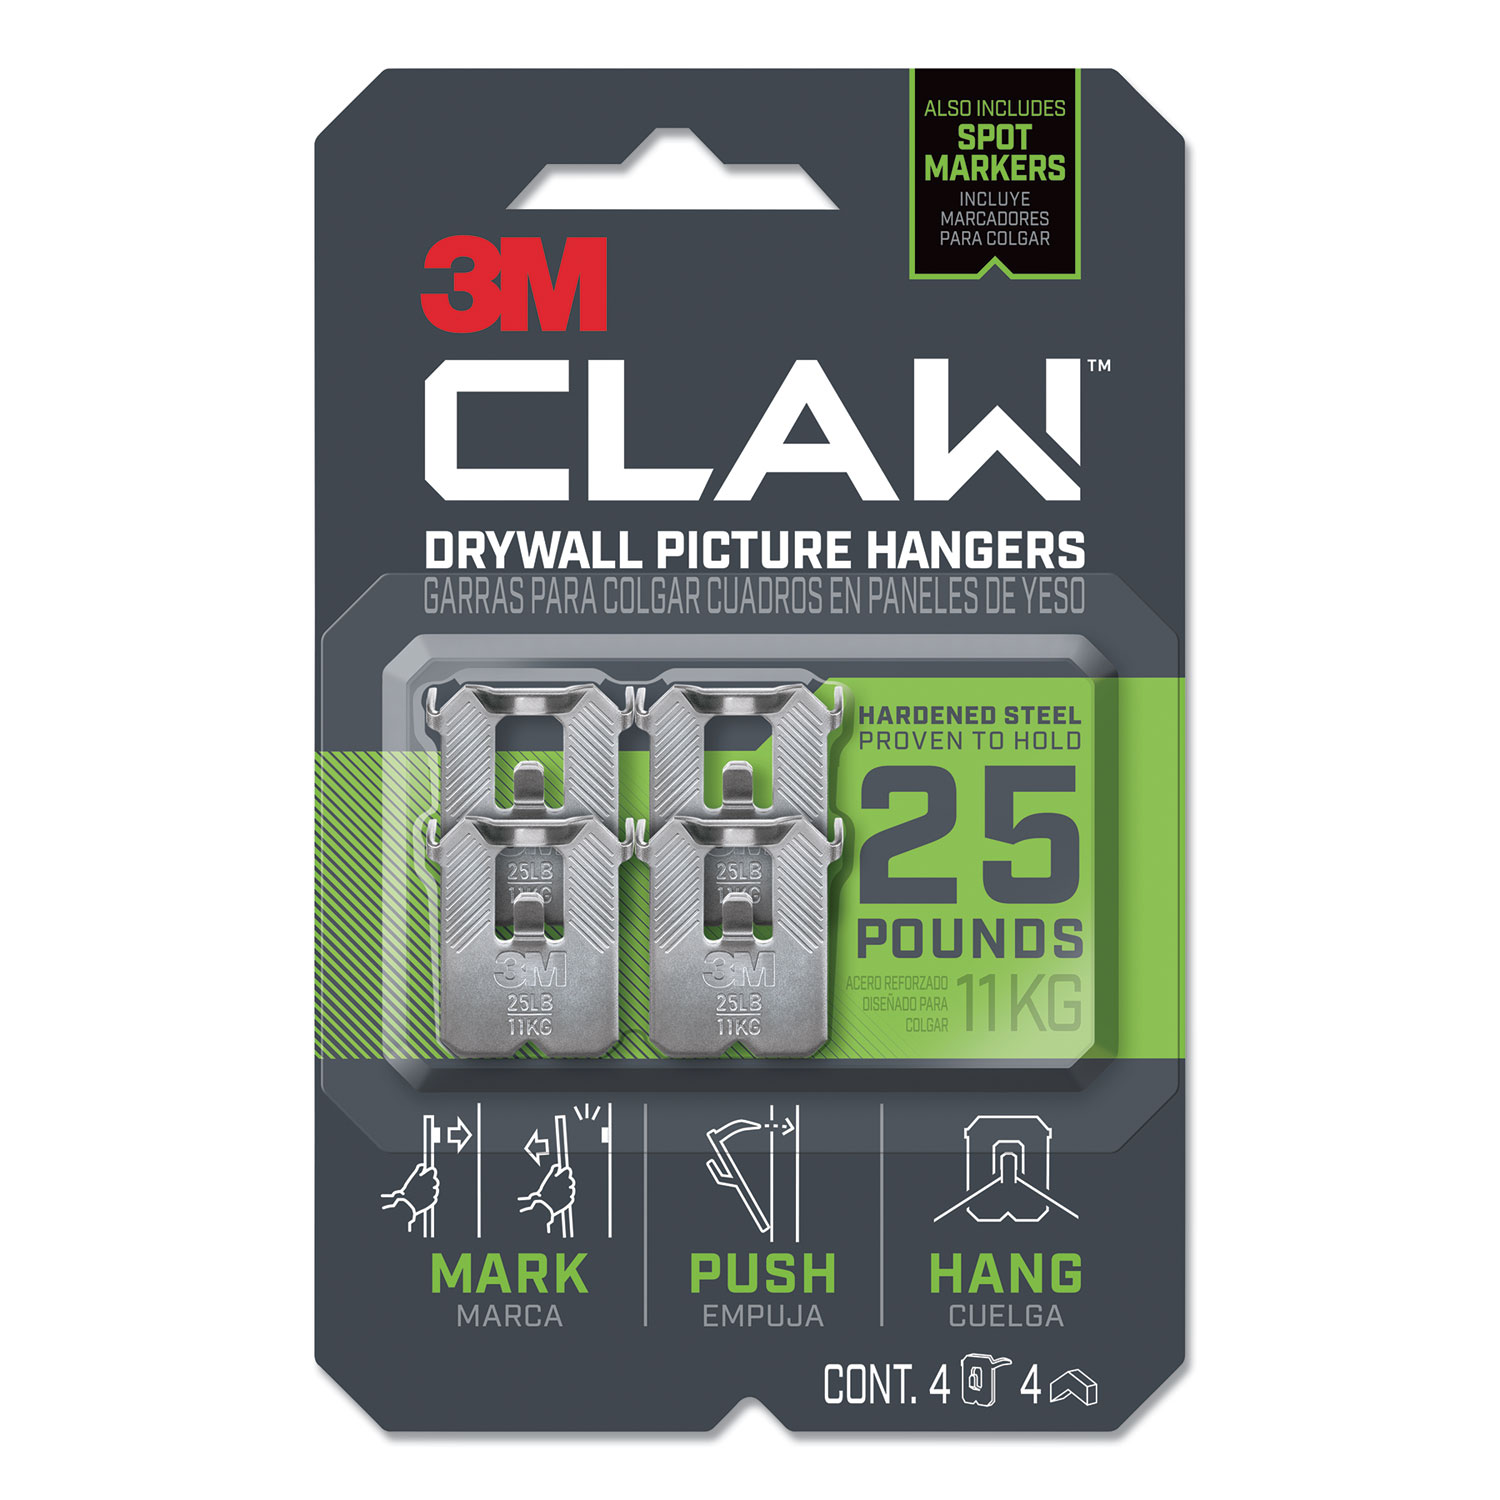  3M 3PH25M-4ES Claw Drywall Picture Hanger, Holds 25 lbs, 4 Hooks and 4 Spot Markers, Stainless Steel (MMM3PH25M4ES) 